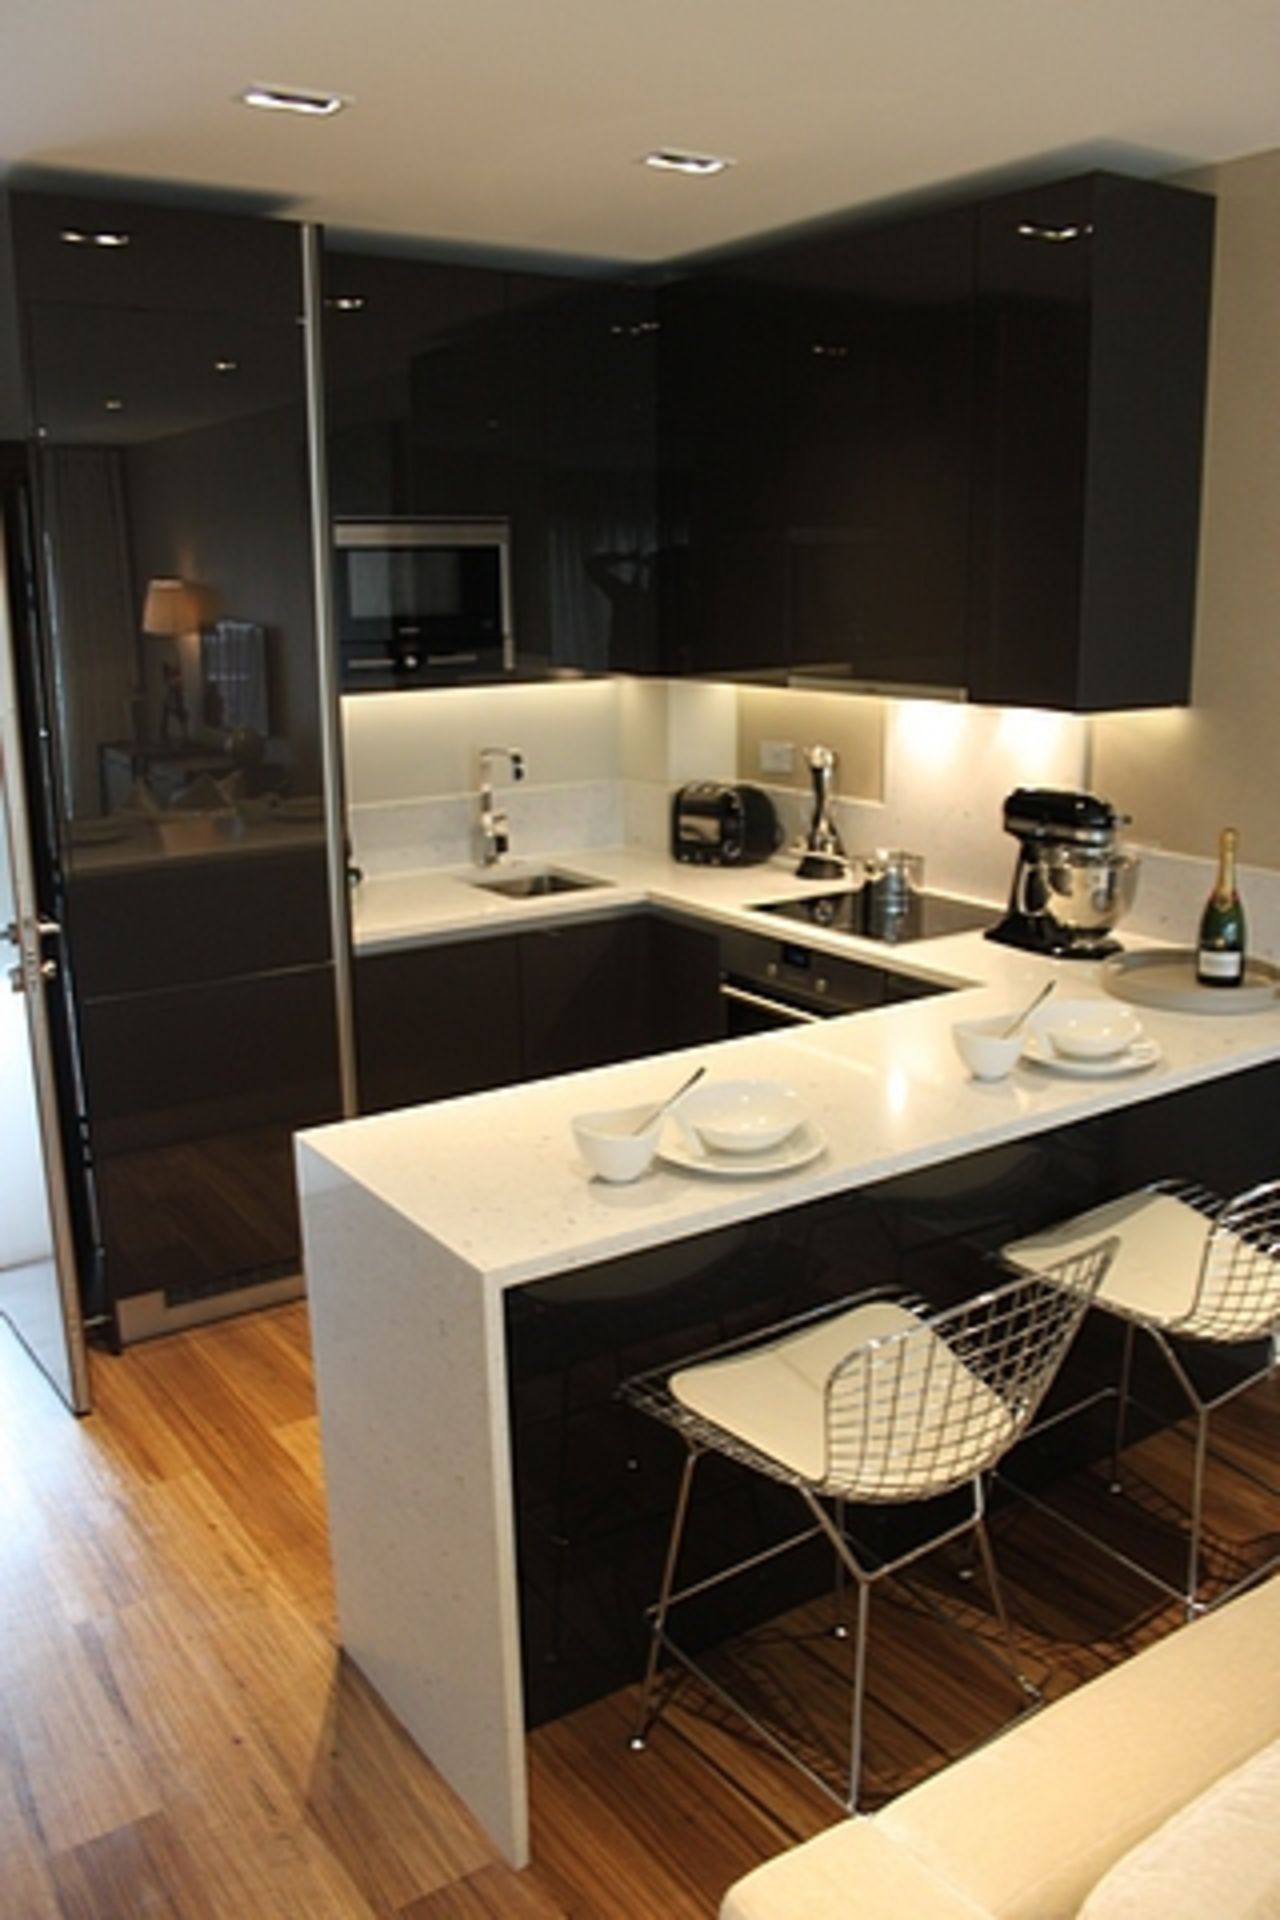 Blum ex- show Apartment Complete U shaped kitchen with base and wall cabinets complete with - Image 9 of 12